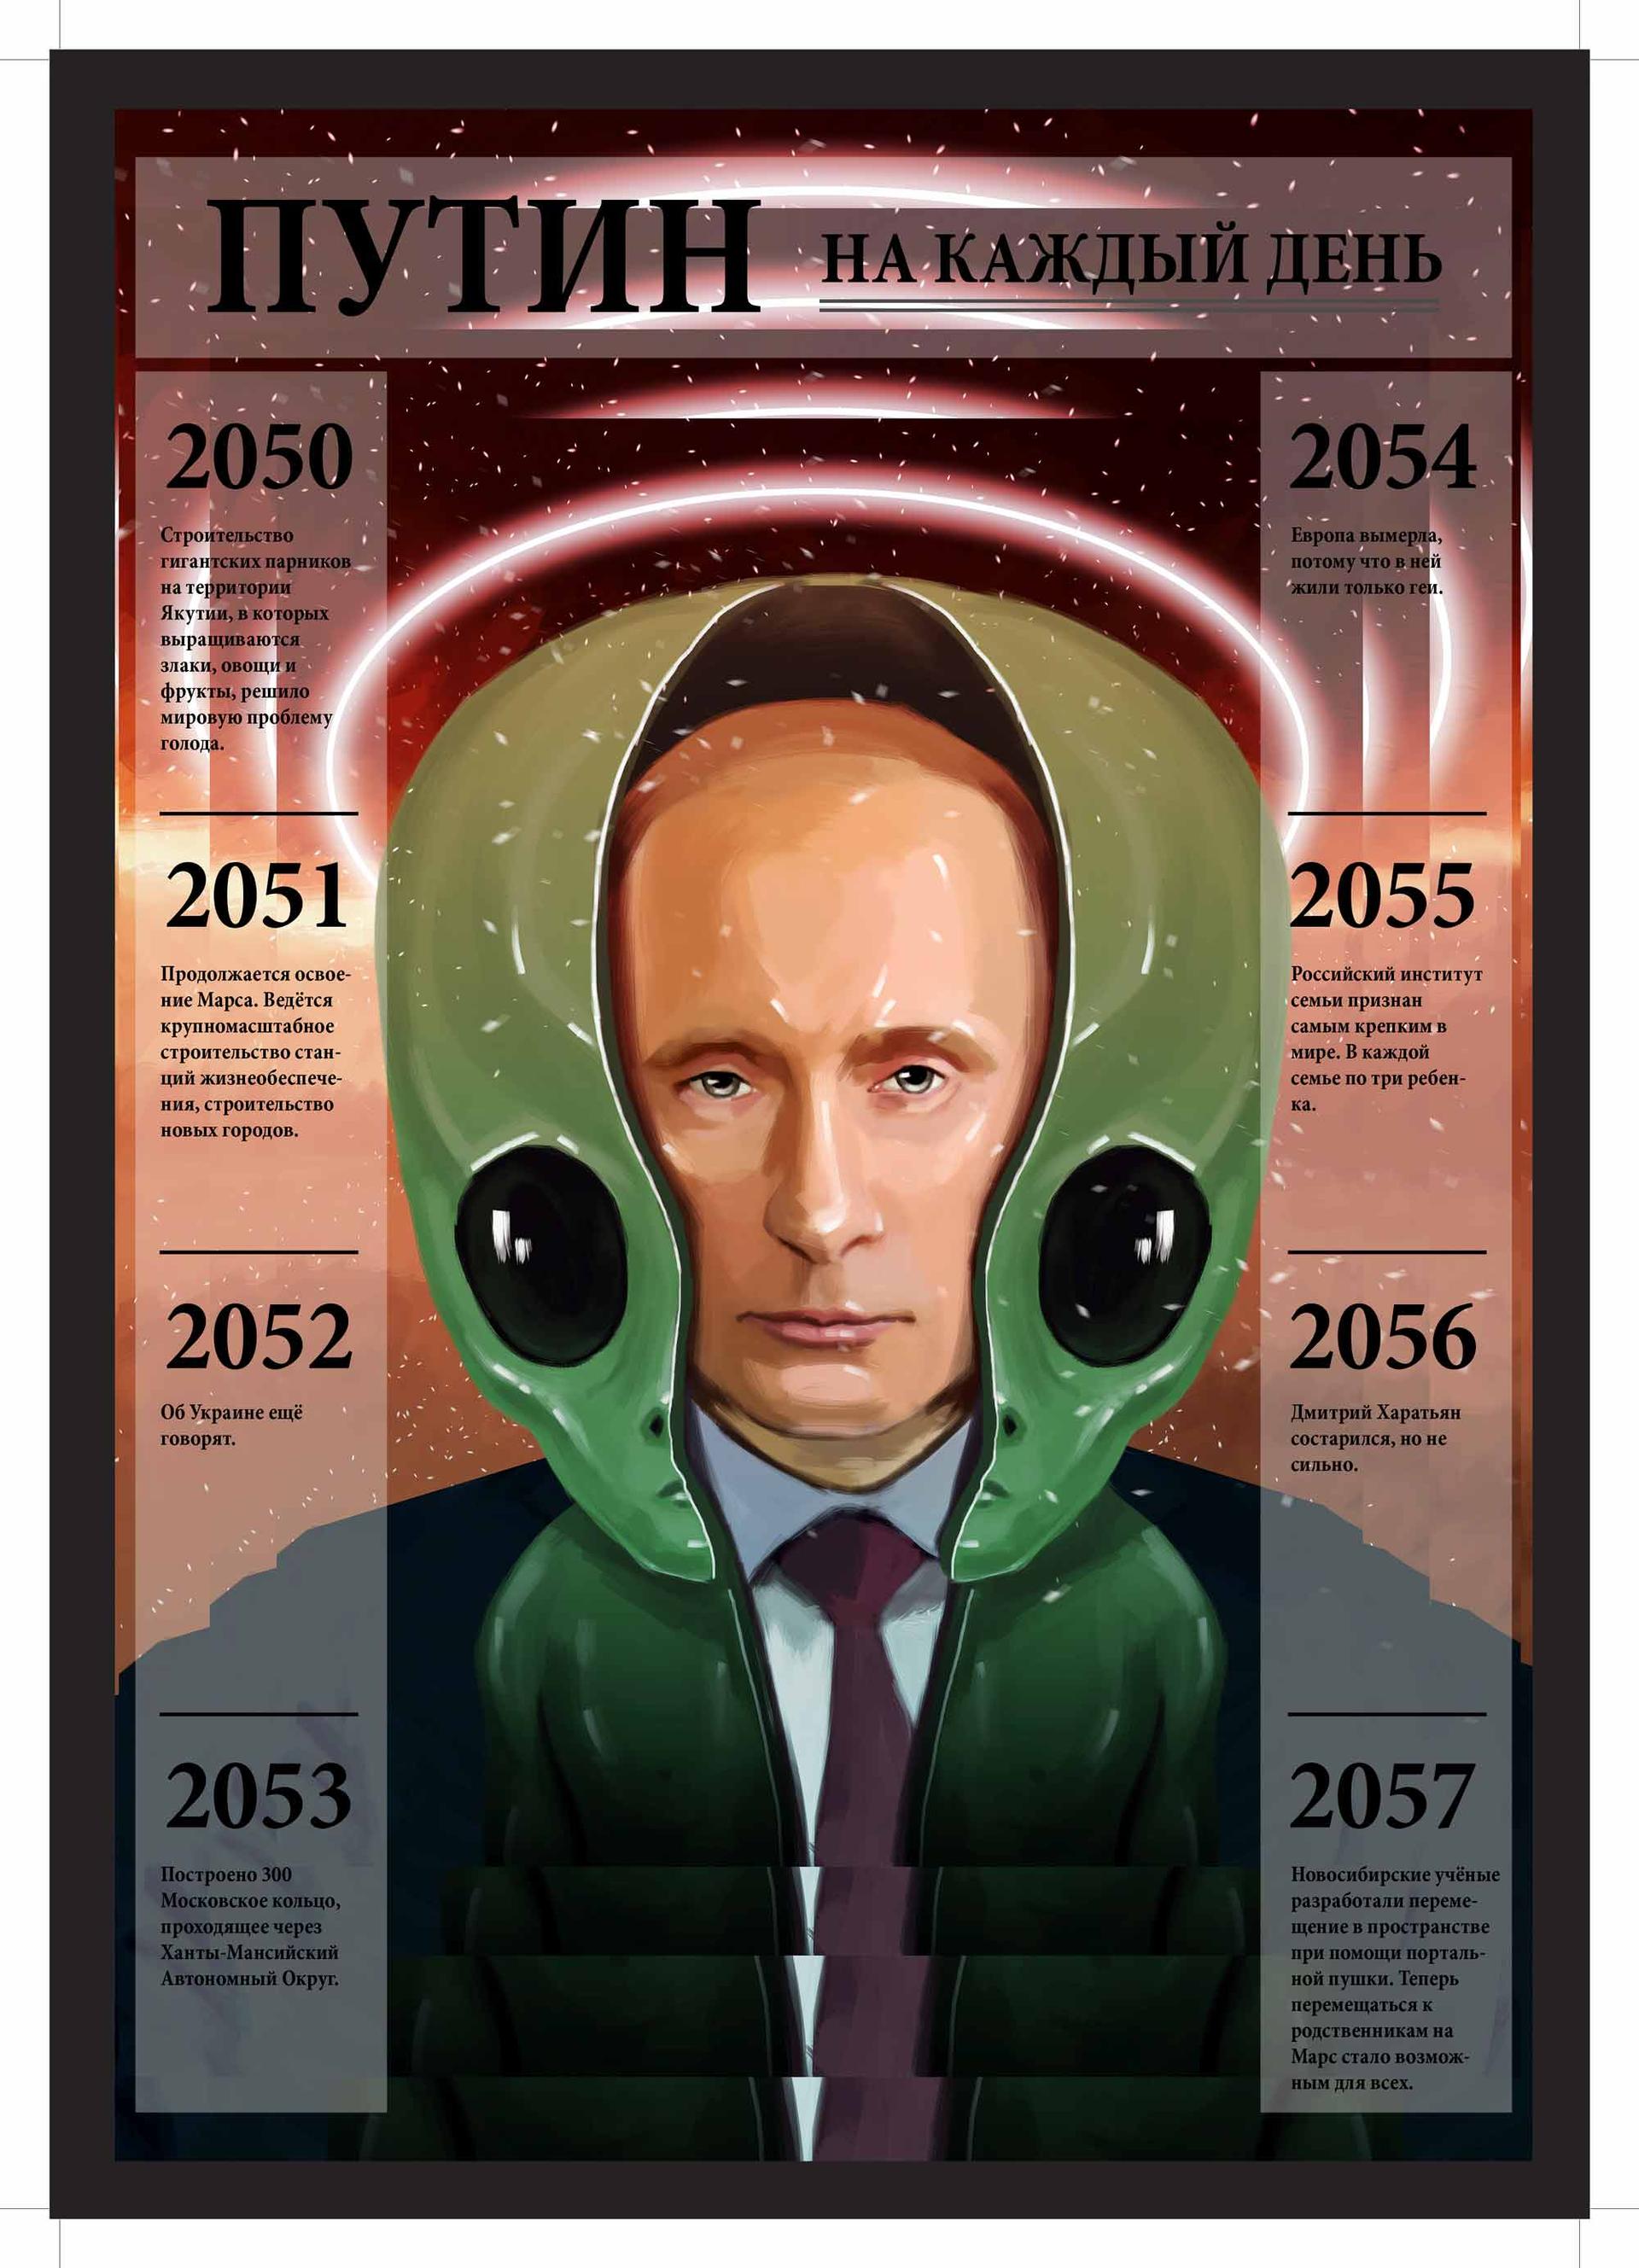 One of the calendar’s pages shows Putin in power — and a space helmet — through the year 2057.